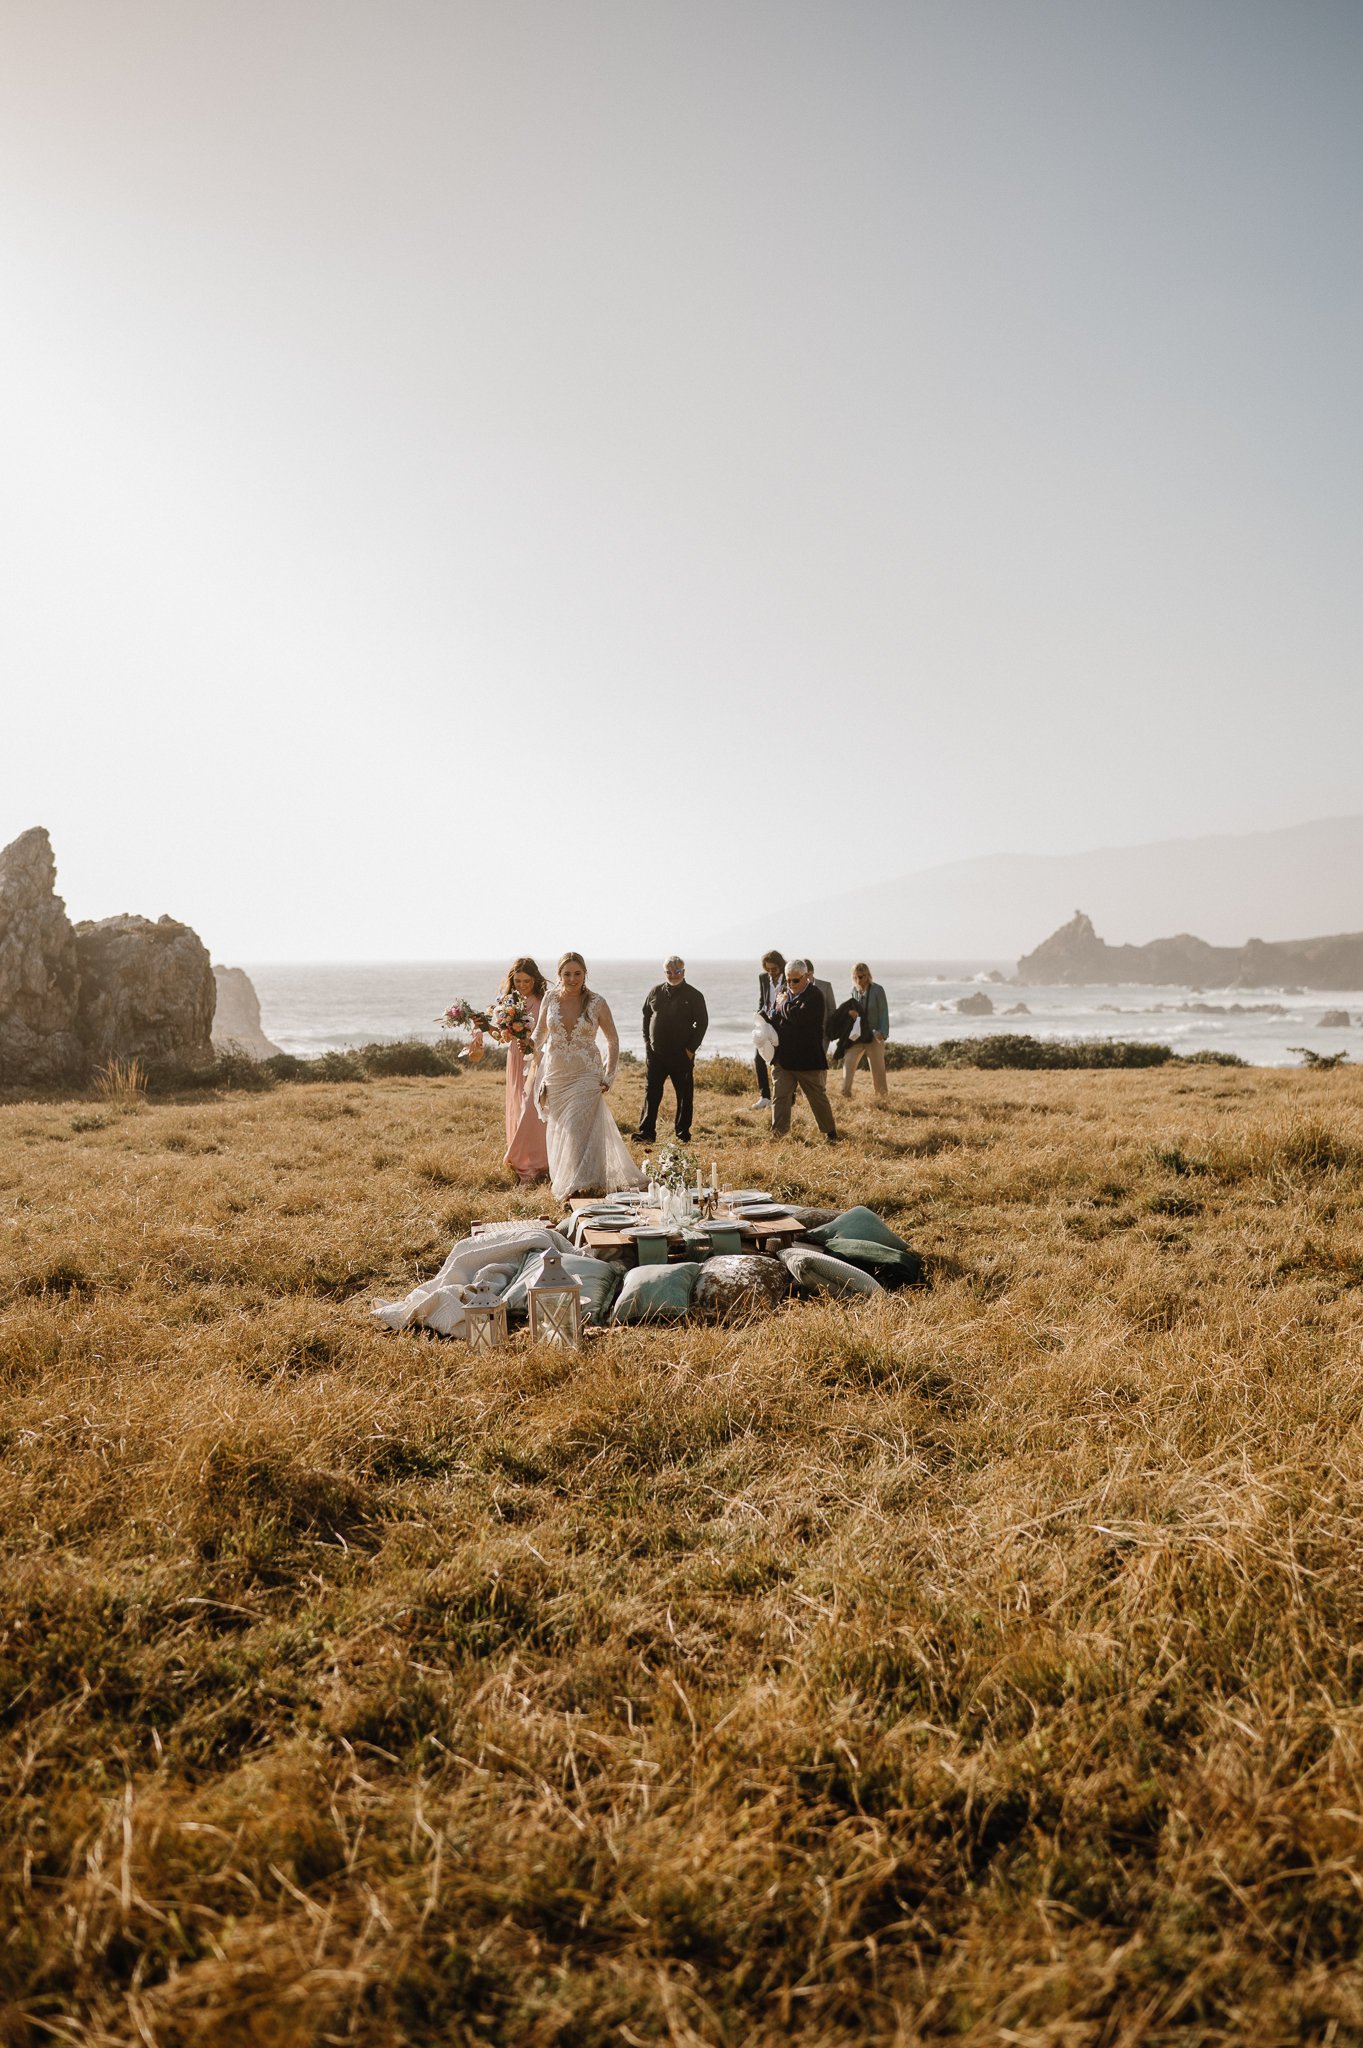 Big Sur Wedding cliffside picnic, table setup in grass with plates, glassware and pillows for all bride, groom and family